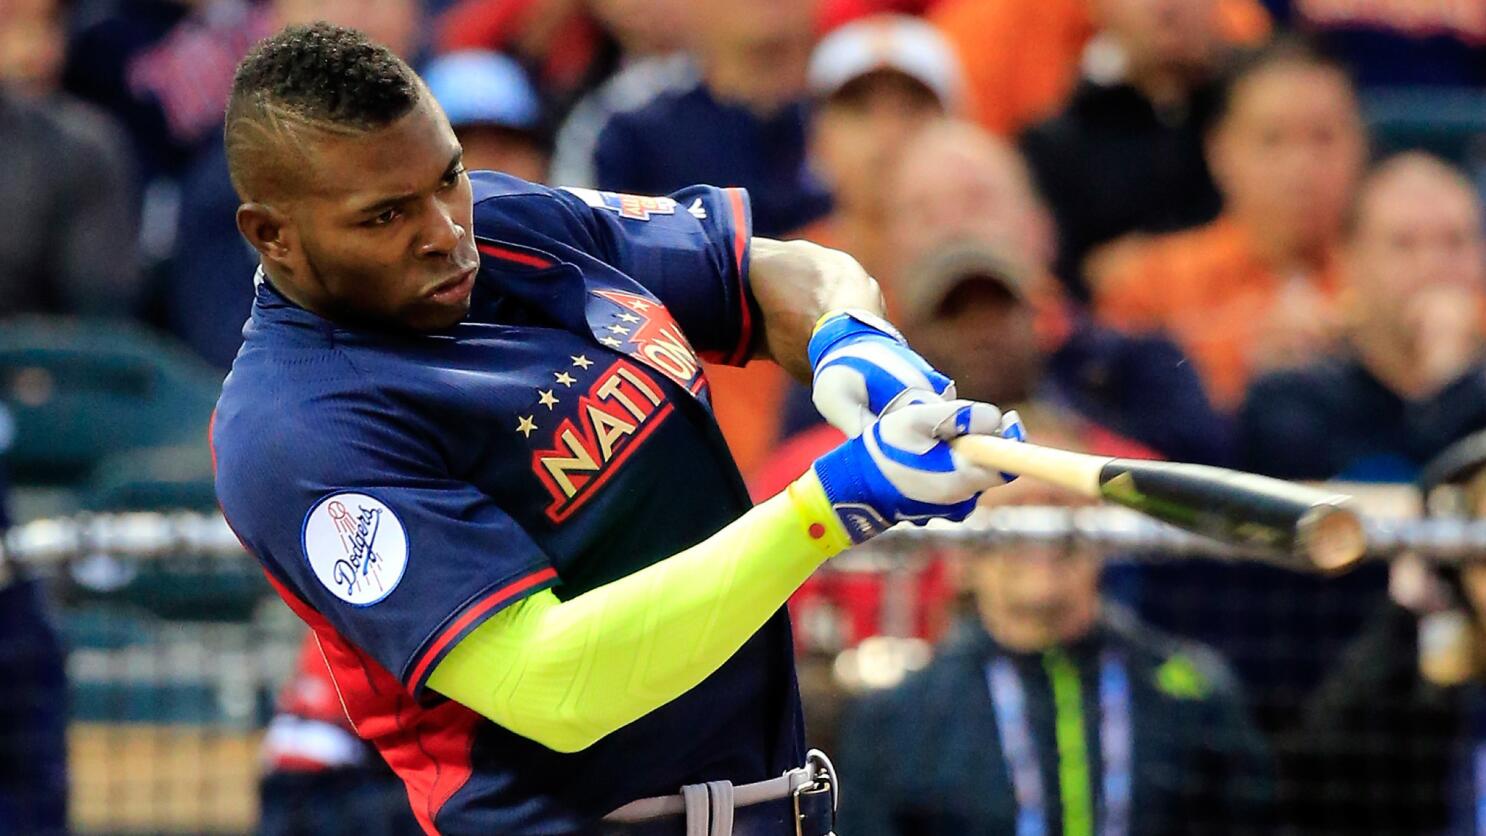 2015 Home Run Derby: Start time, rule changes, hitters - Sports Illustrated